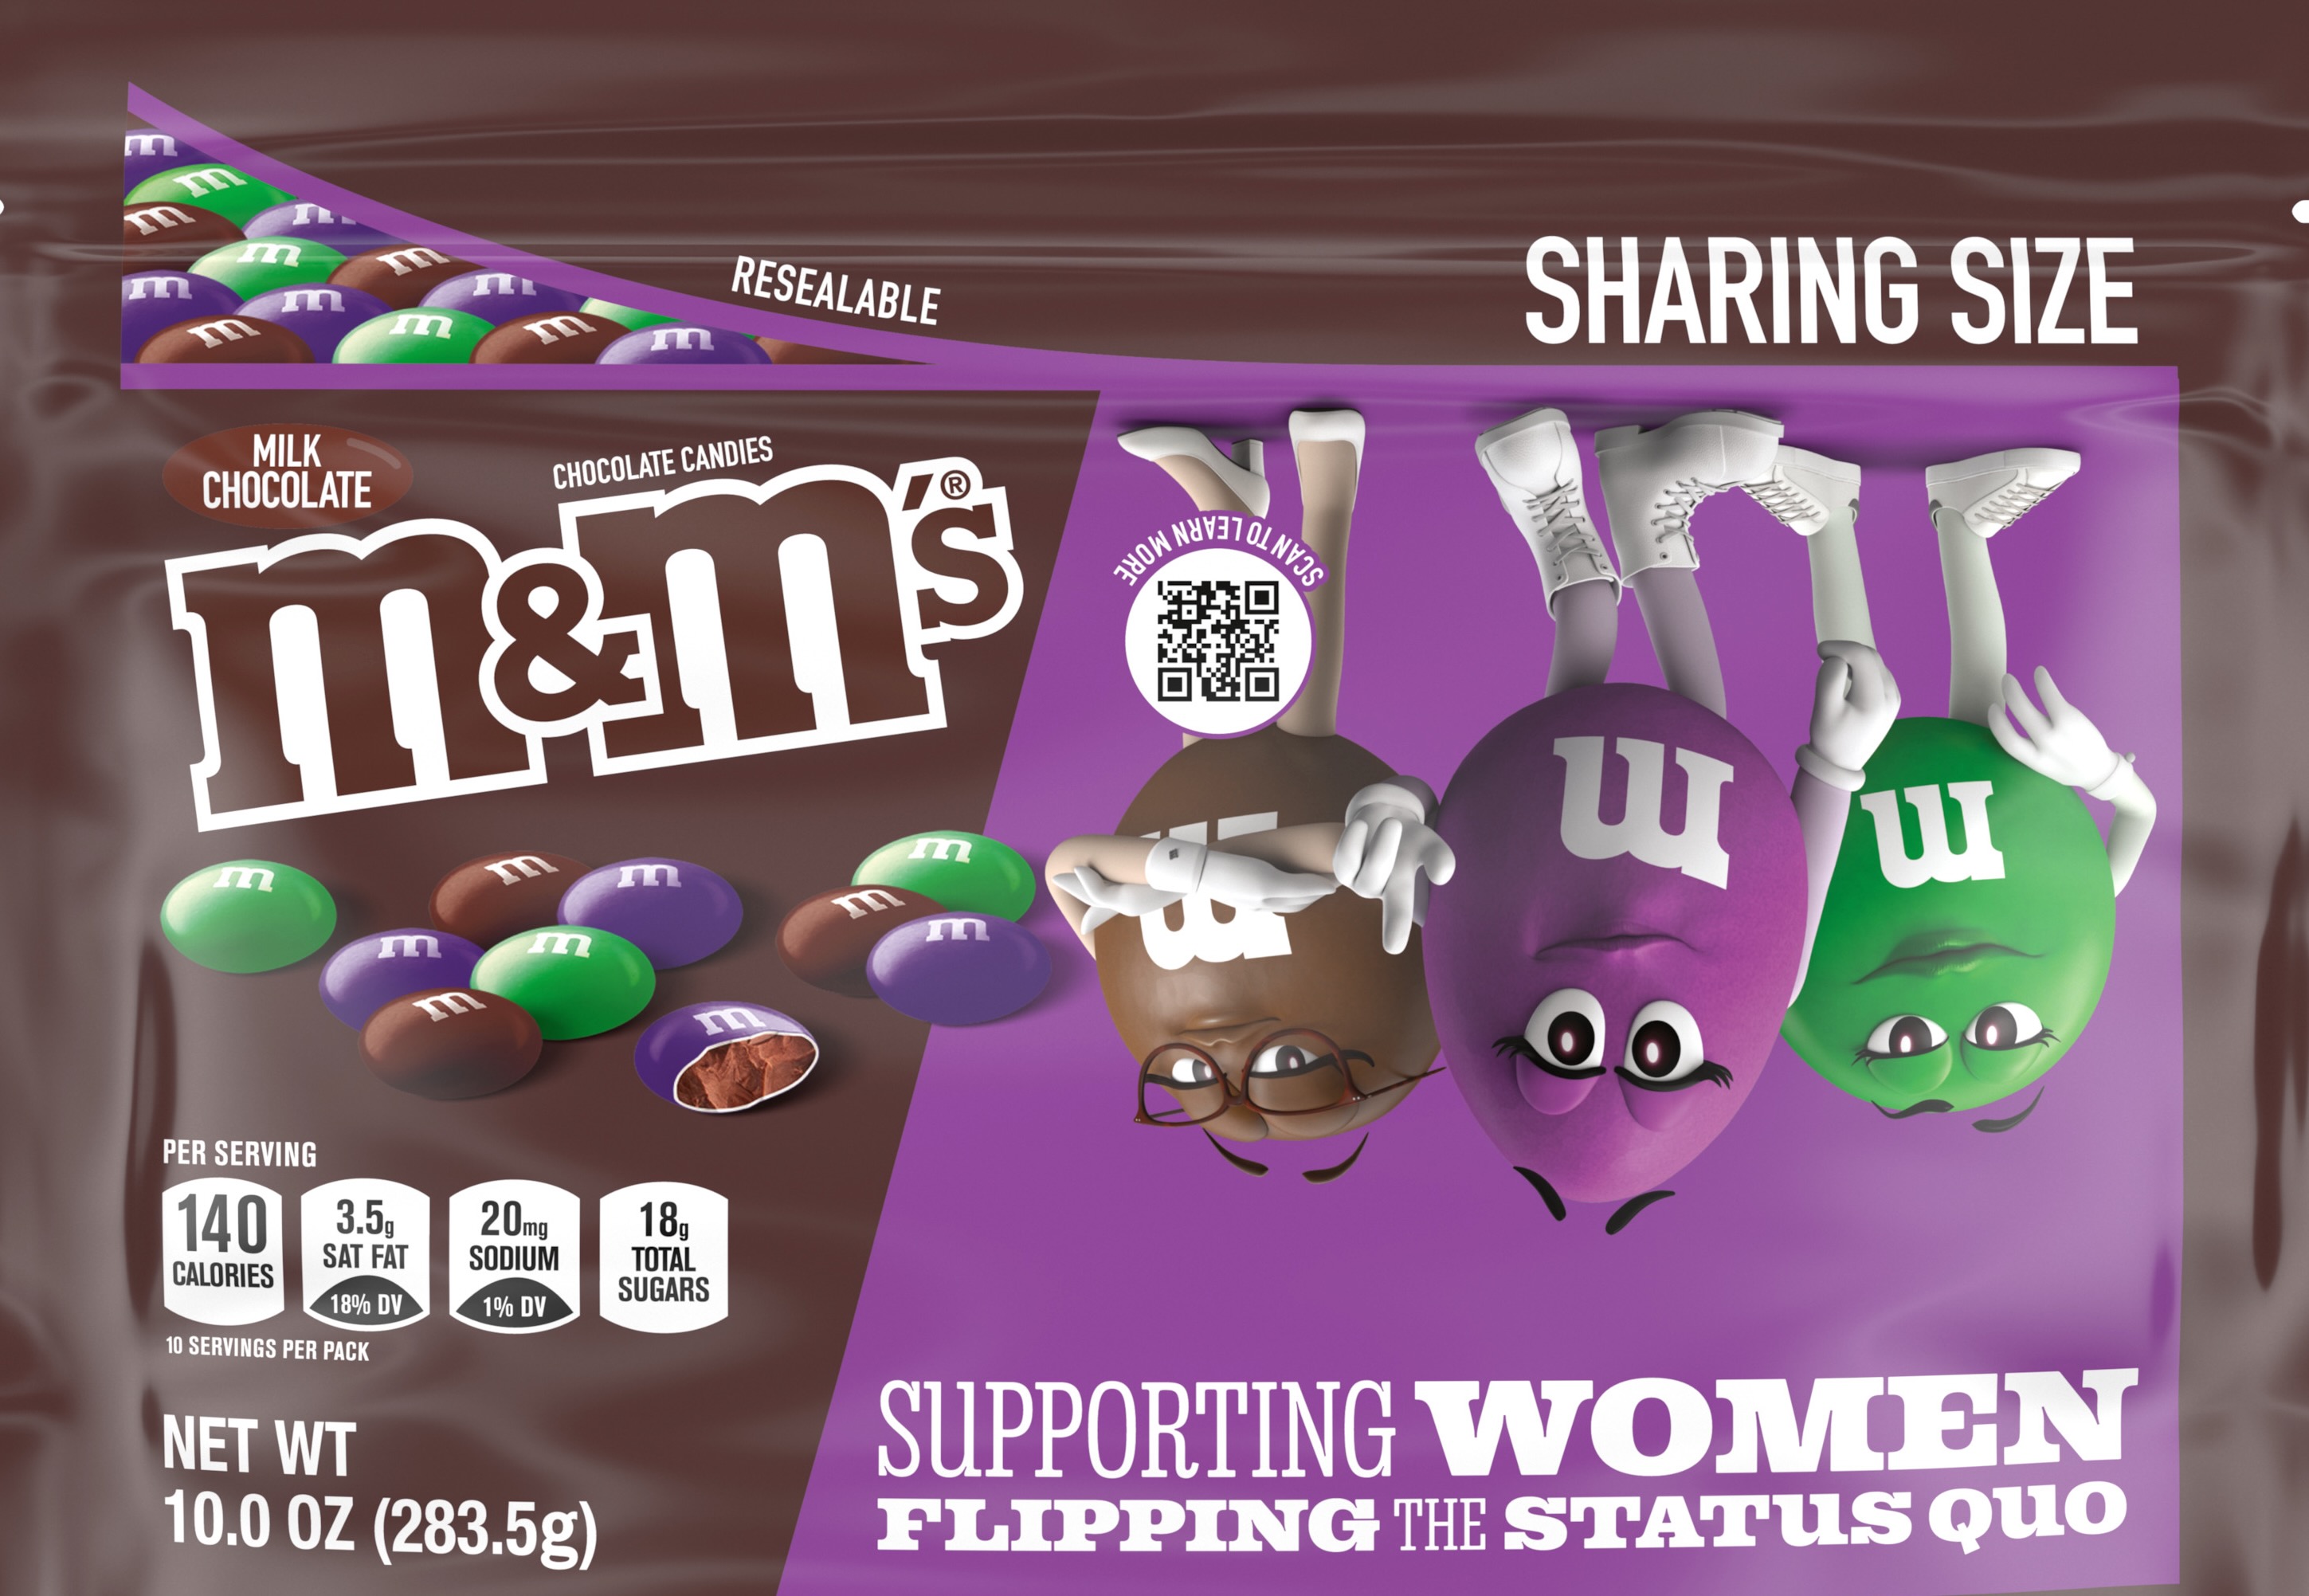 Mars announces packs with all-female M&M's characters